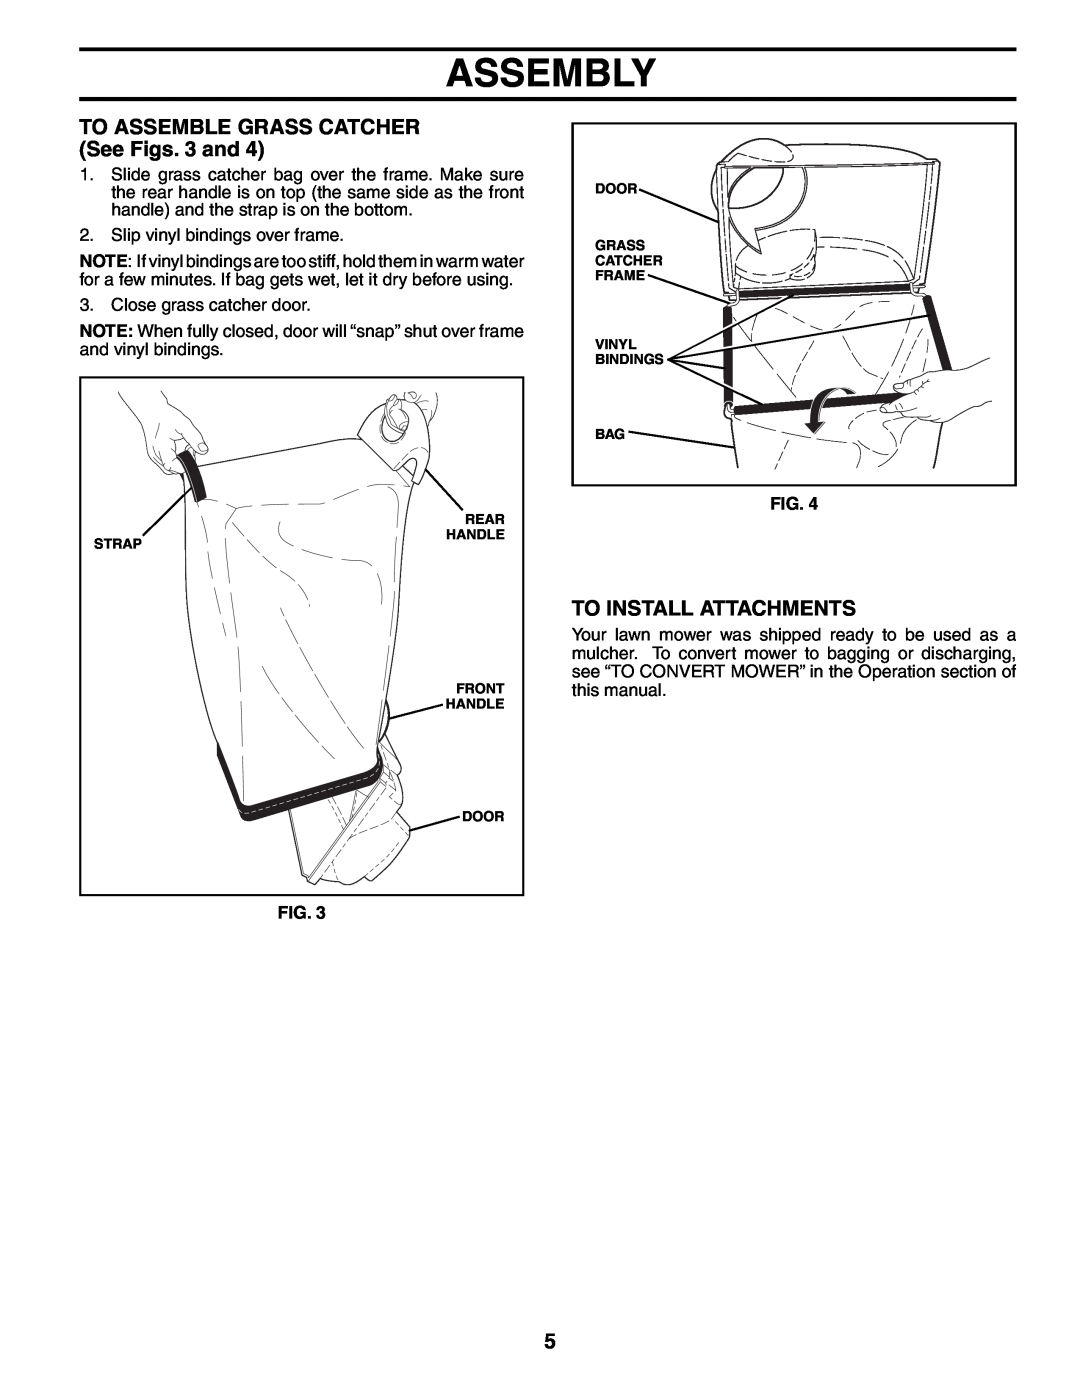 Husqvarna 55R21HV owner manual TO ASSEMBLE GRASS CATCHER See Figs. 3 and, To Install Attachments, Assembly 